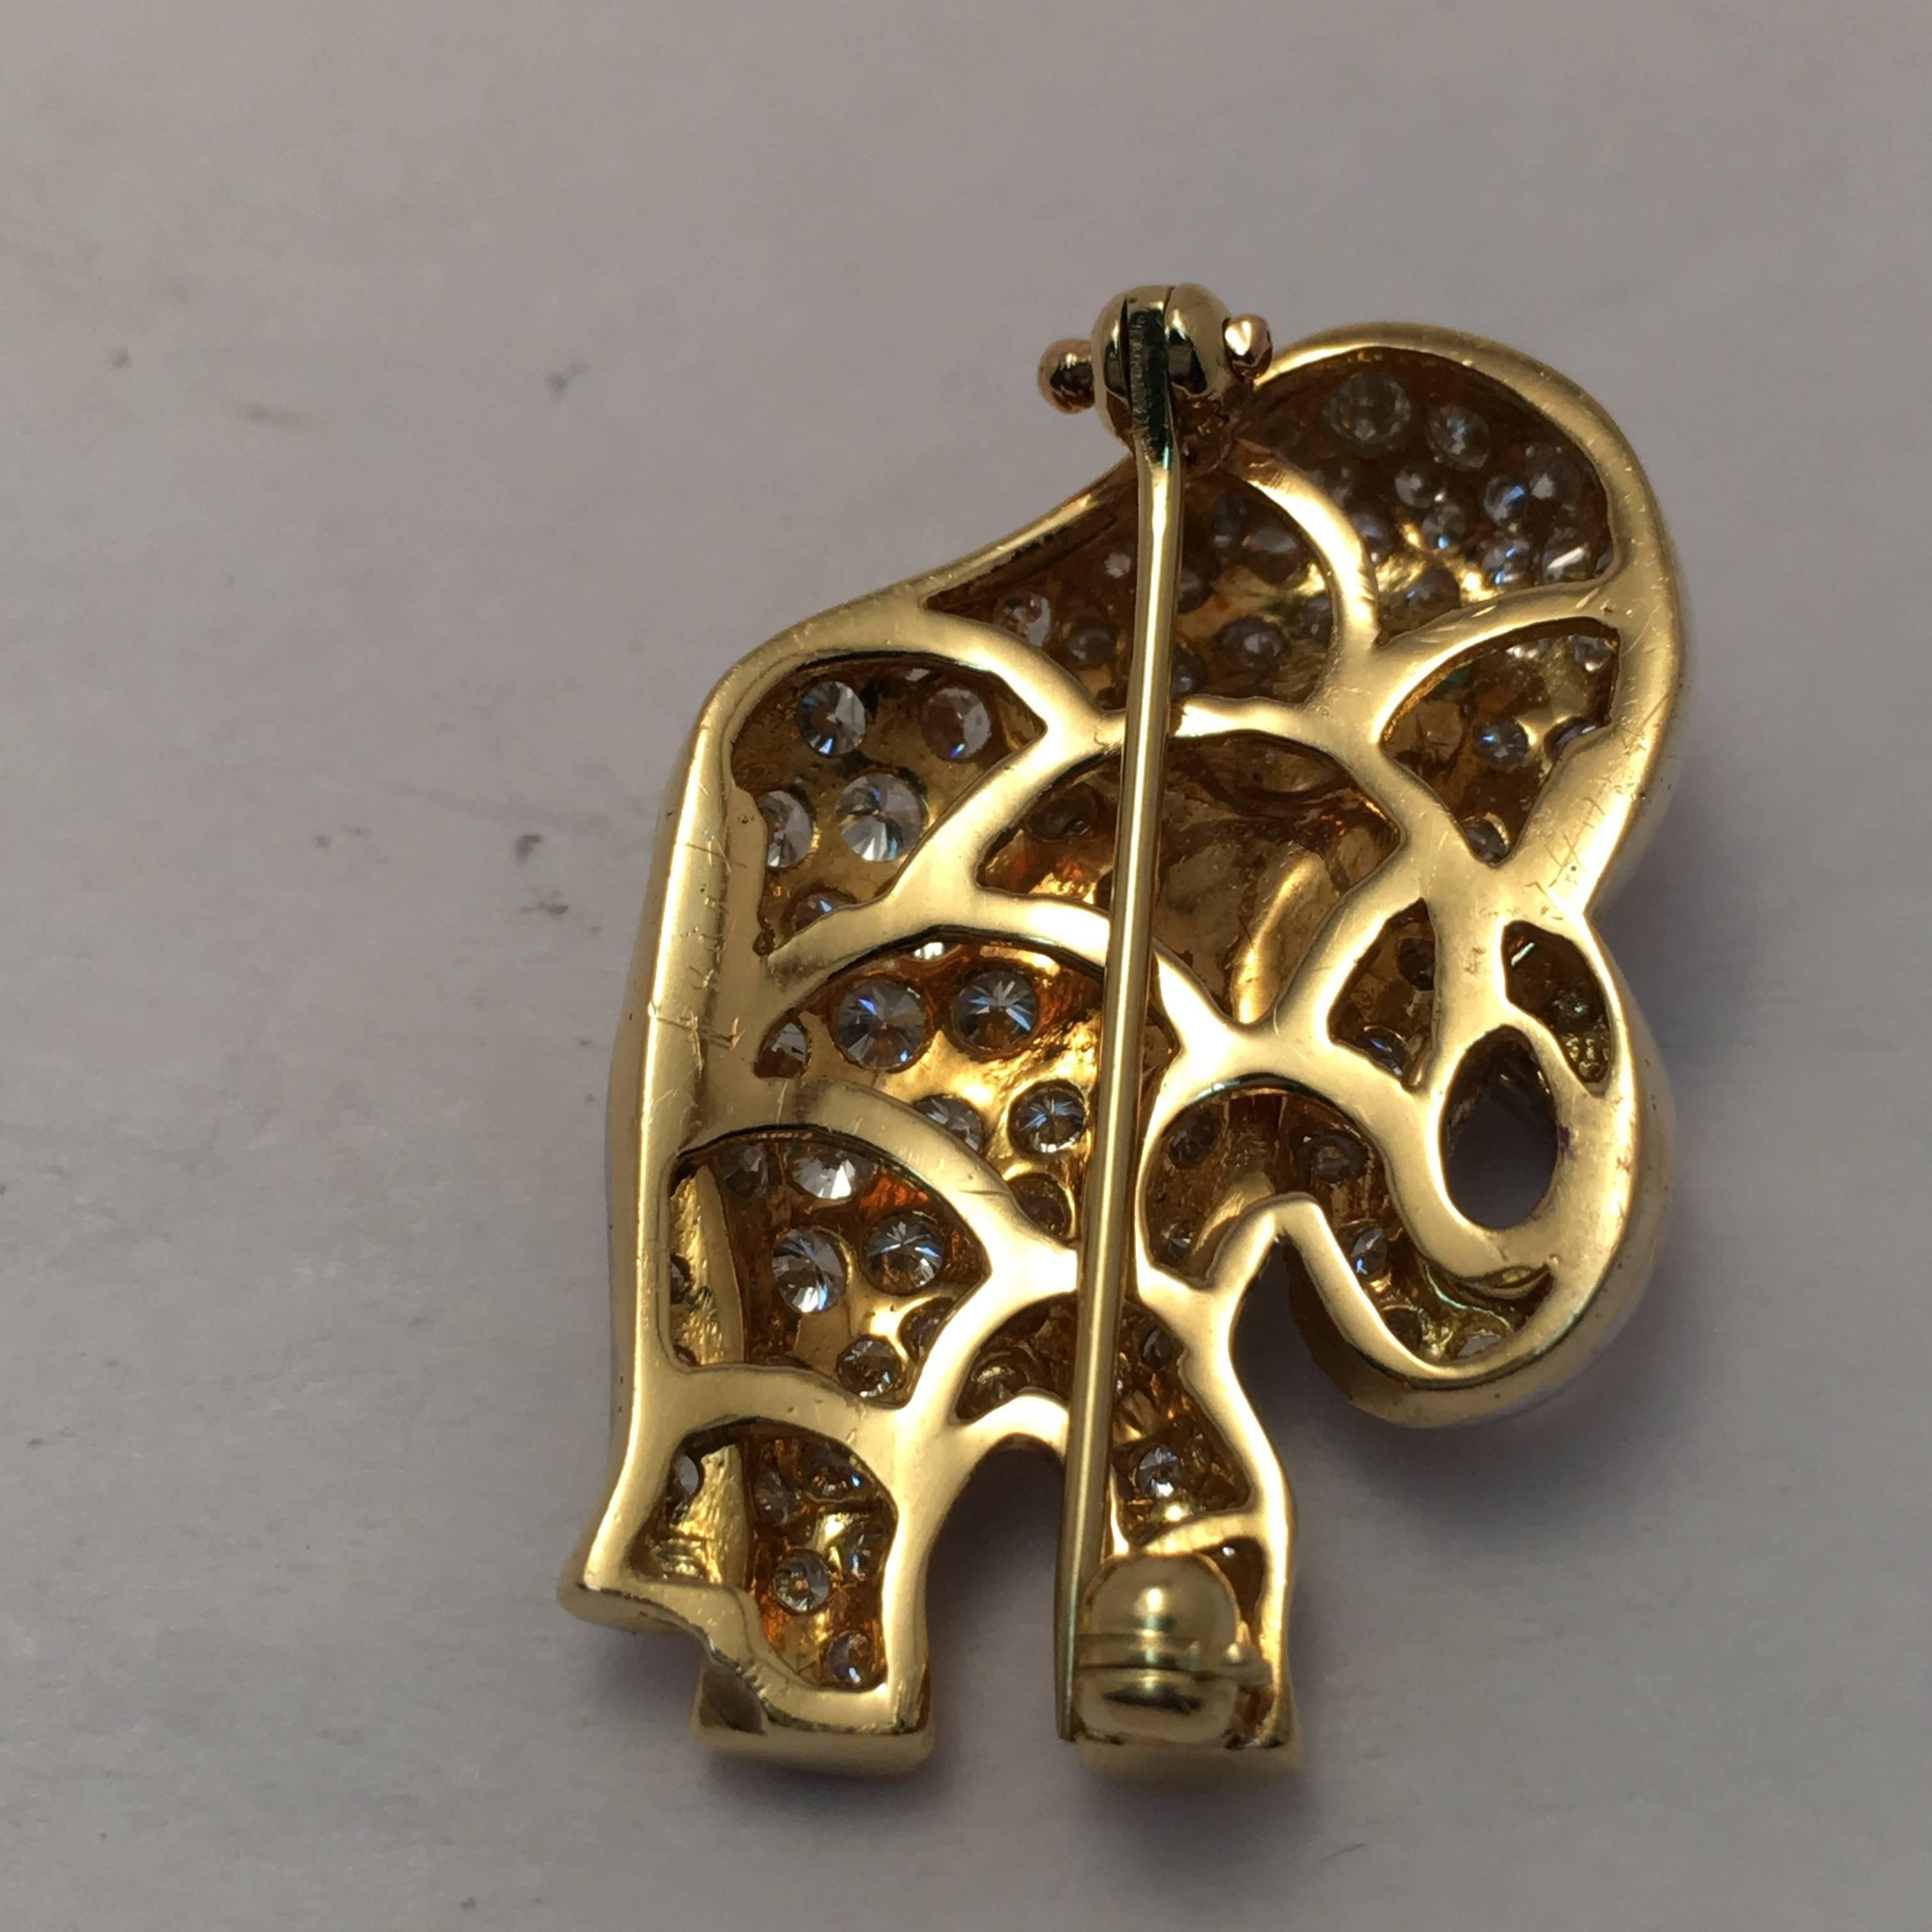 This 18 Kt. yellow gold elephant brooch is meticulously set with 106 full cut round diamonds weighing approximately 3.15 ct. total weight and one round cut emerald for the eye.  Whether making a political statement or animal lover, this makes a